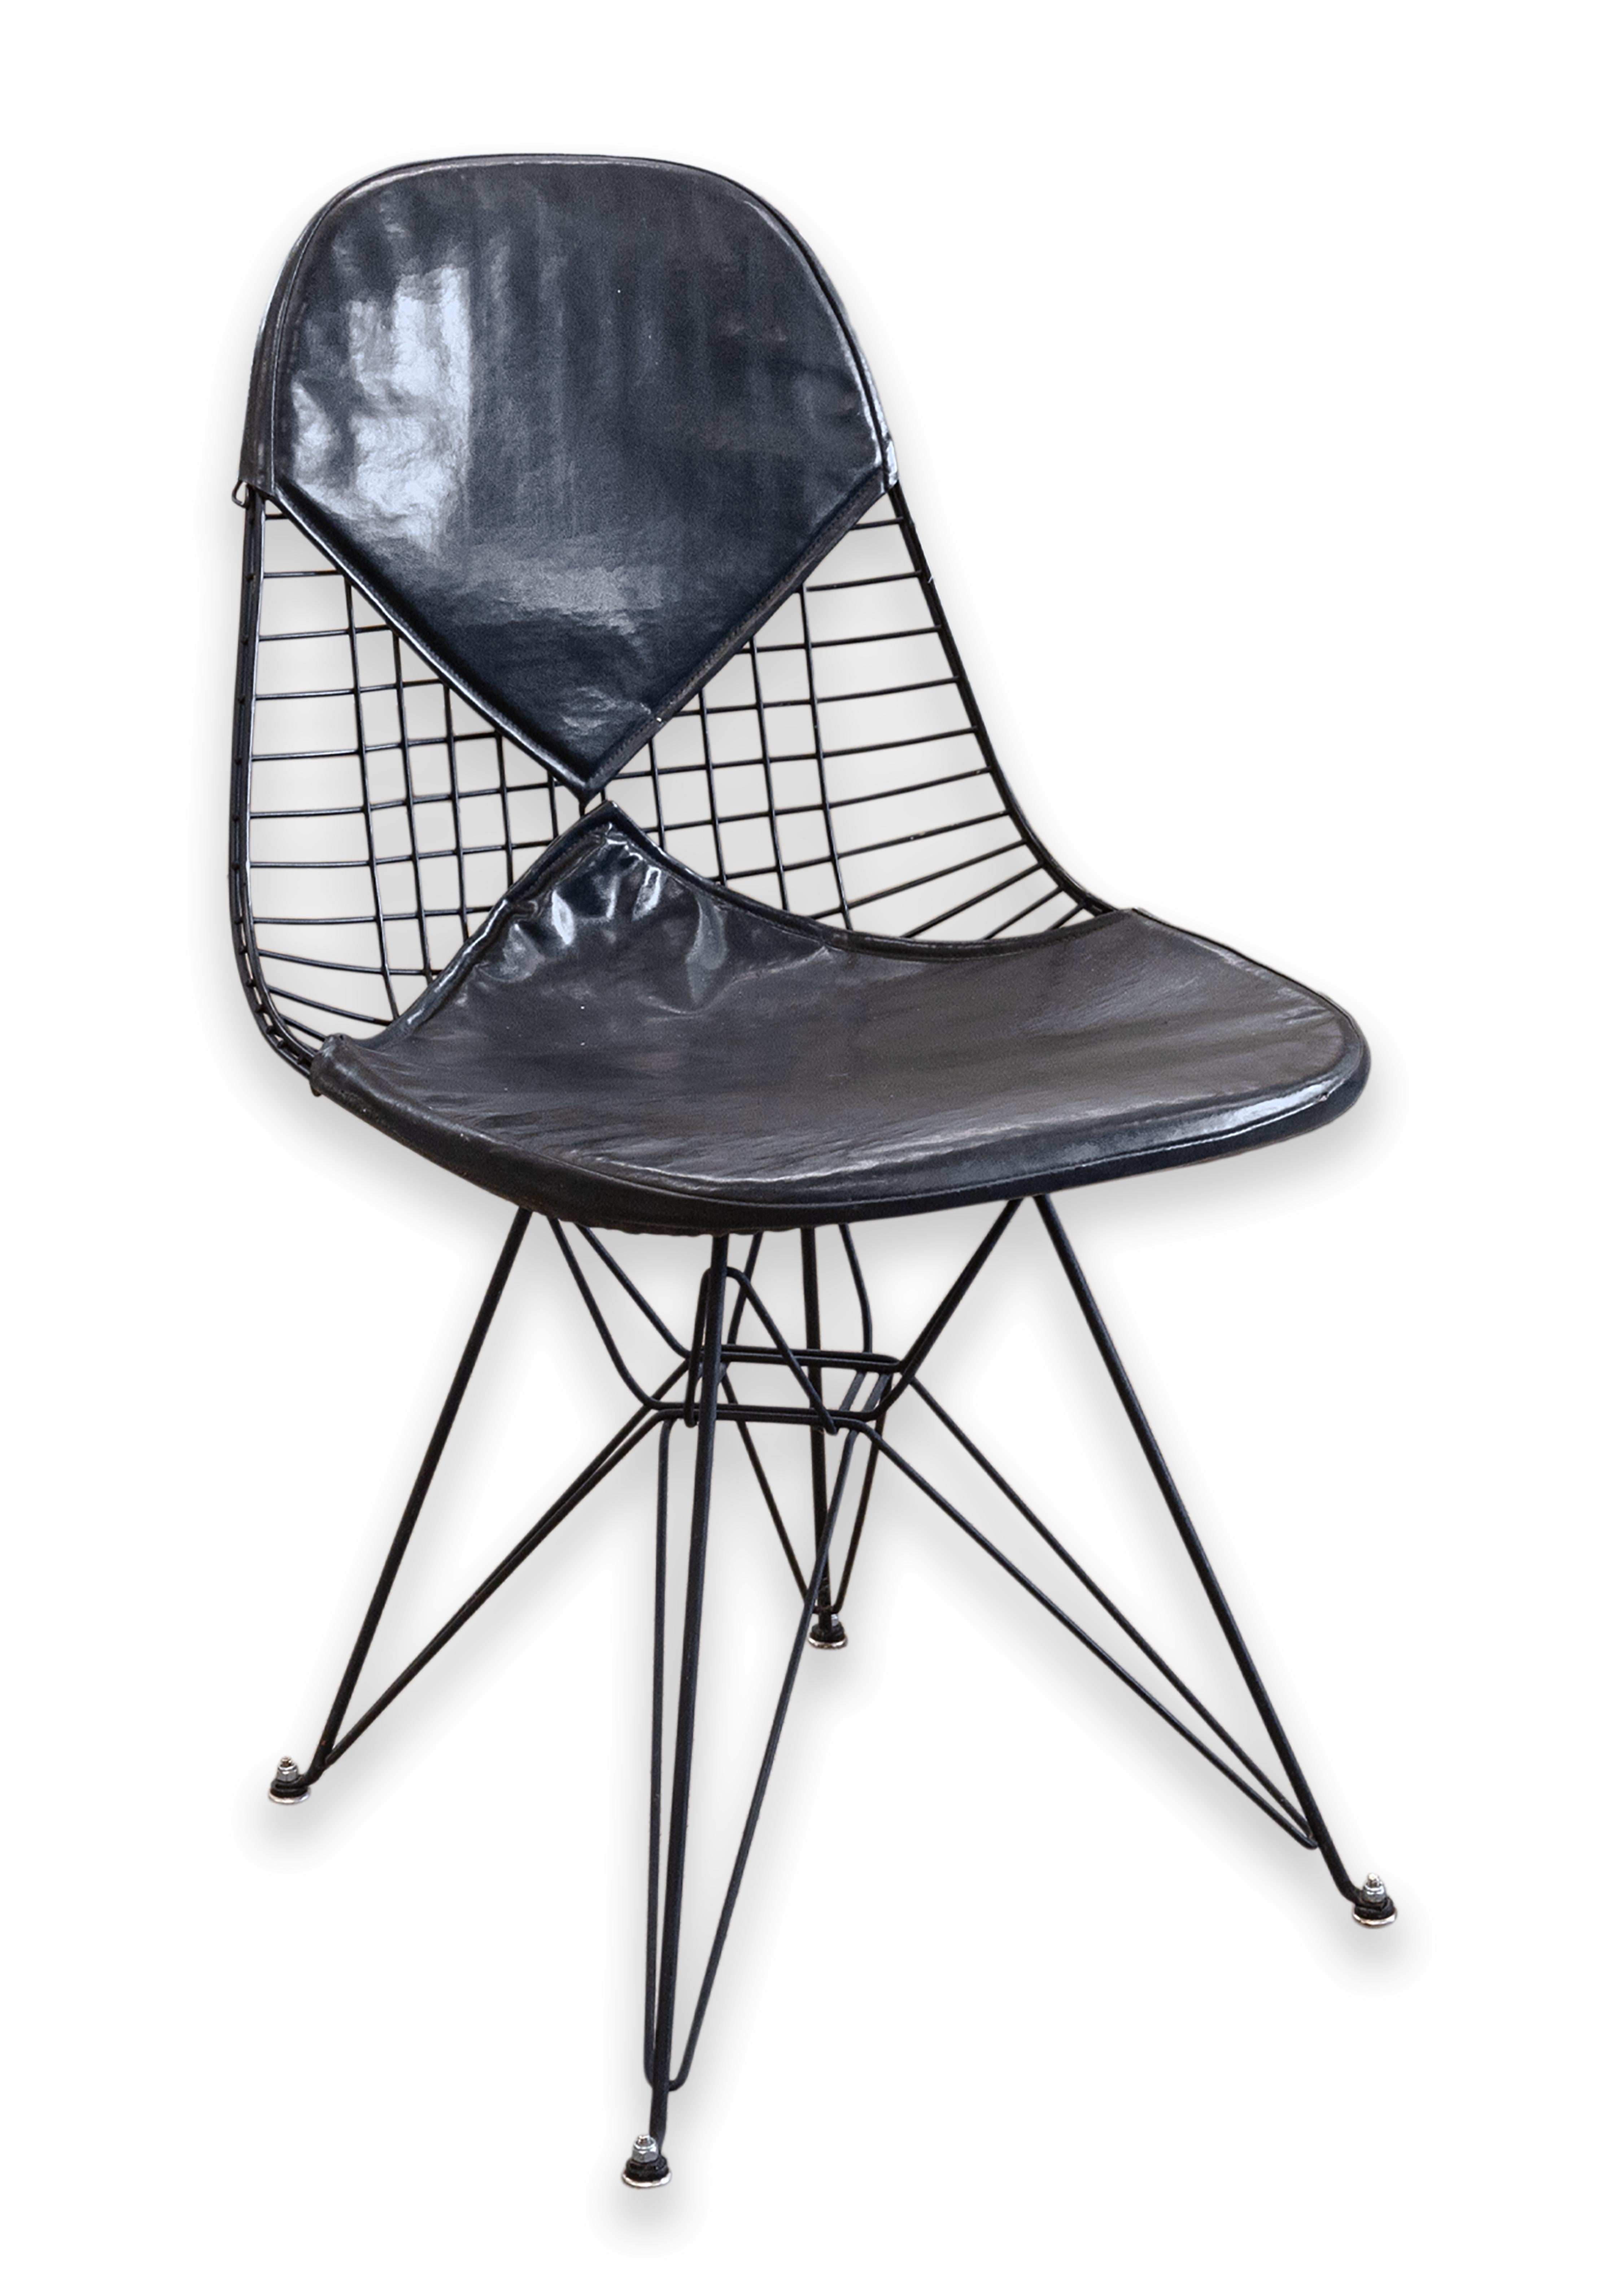 A 1st generation Eames Herman Miller DKR-2 wire Eiffel Tower chair. A truly iconic chair from the mid century modern era. This piece has the iconic wire frame with a black finish, four wire legs with splayed feet, and the original black leather